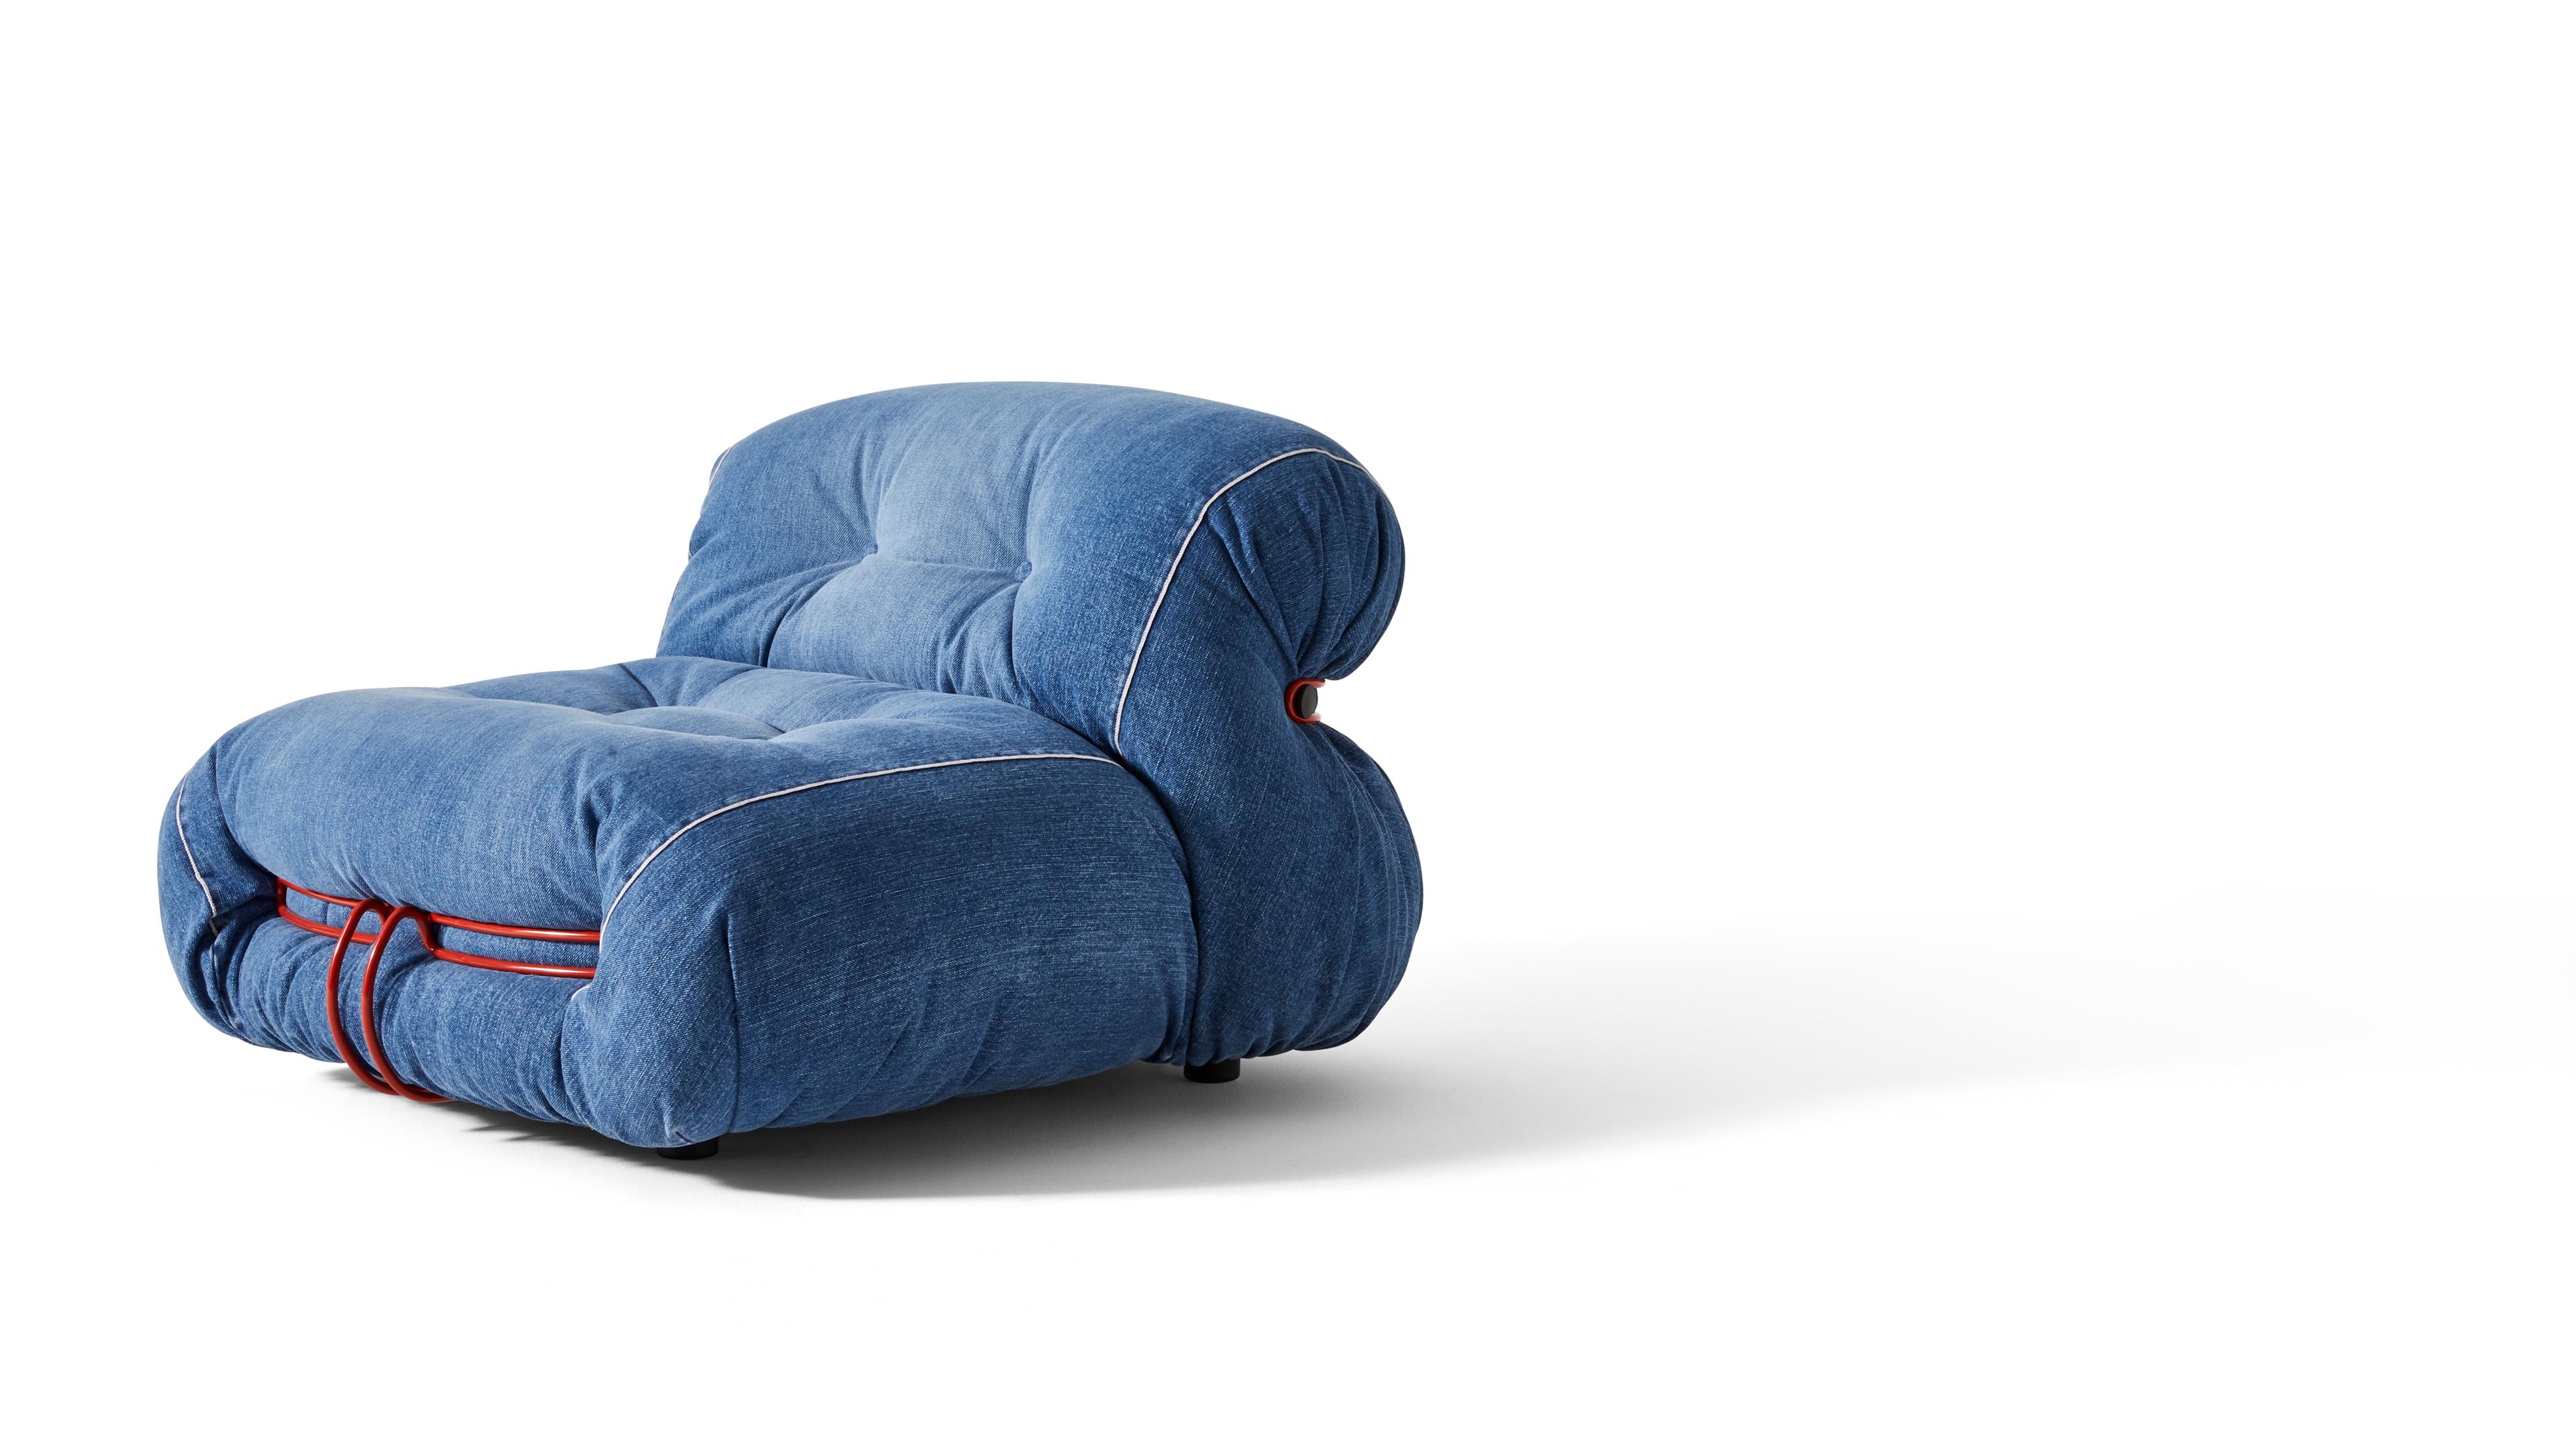 Soriana Limited Edition Denim armchair by Afra & Tobia Scarpa for Cassina.

A design armchair with soft, generous contours, designed by Afra and Tobia Scarpa in the 1960s to bring home casual comfort, is swathed in premium Japanese denim, in a